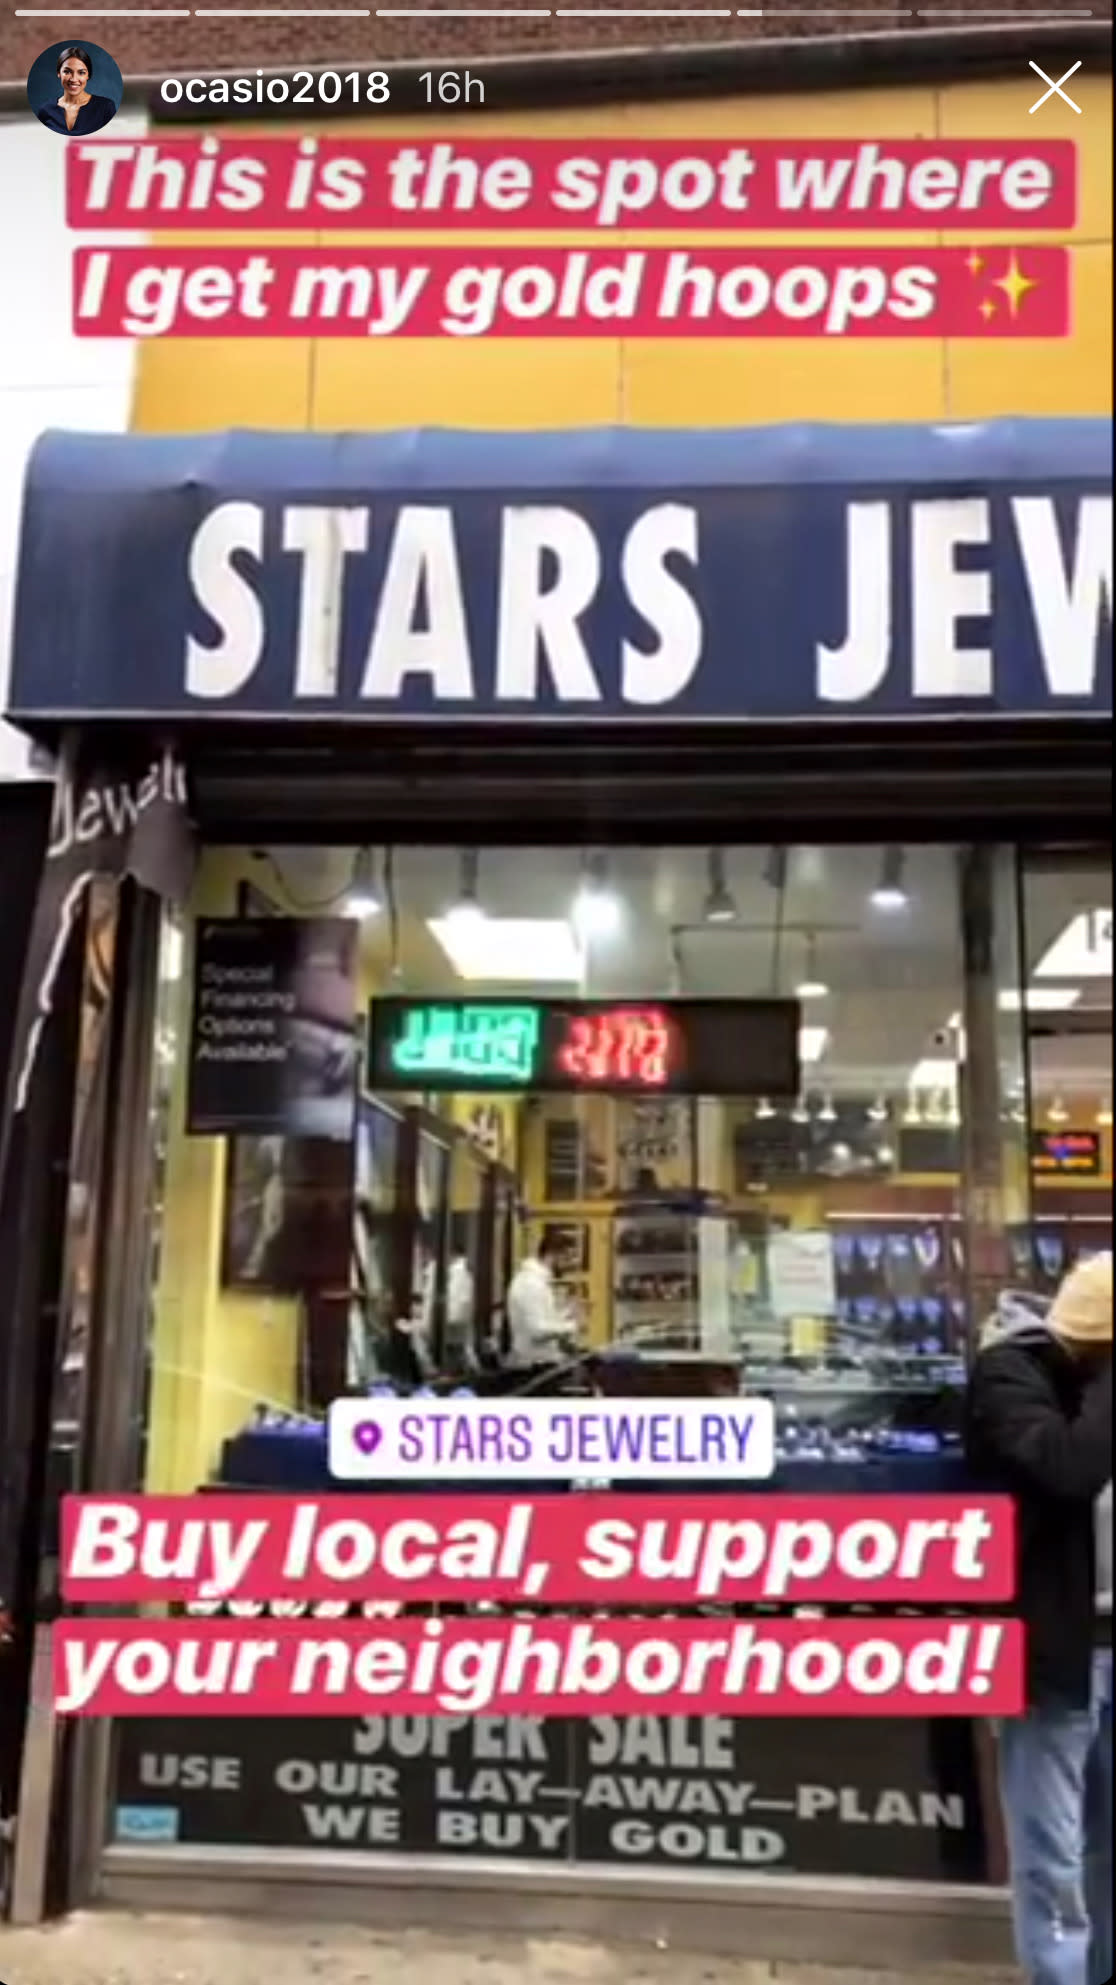 Rep. Ocasio-Cortez posted a video showing where she bought her gold hoops in the Bronx. (Photo: Alexandria Ocasio-Cortez via Instagram)